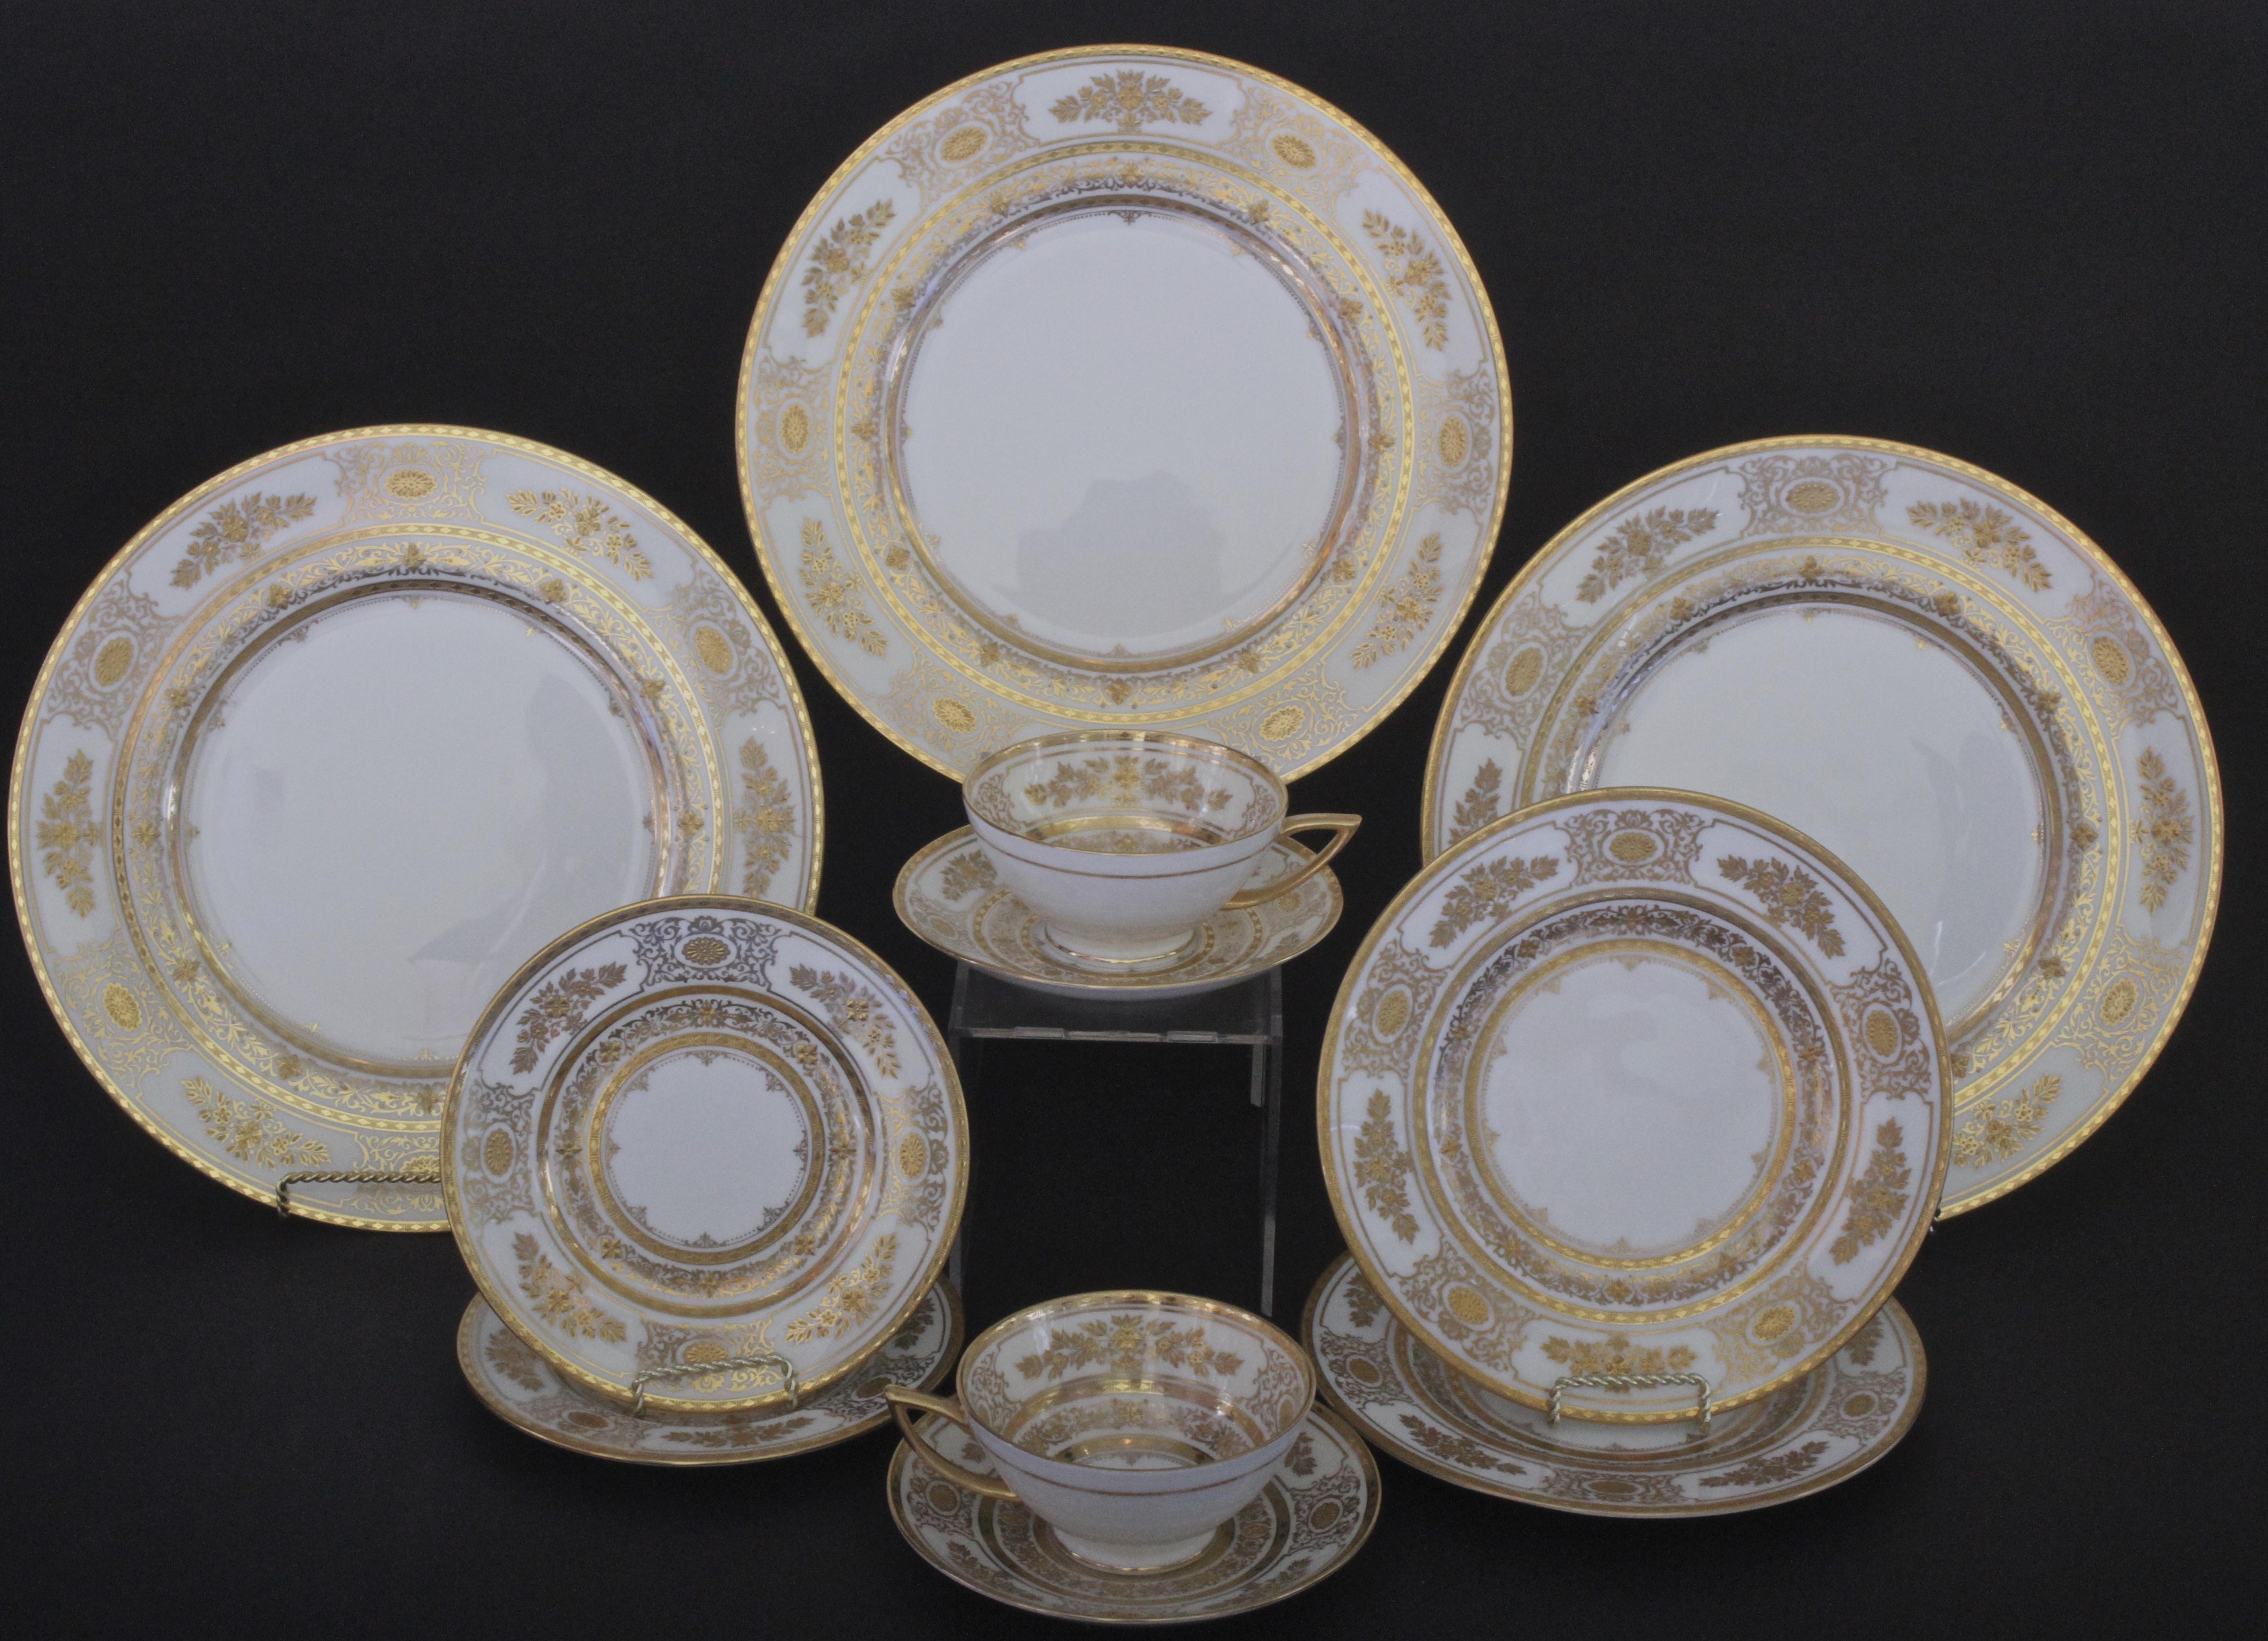 Here is a rare gilded service for 12 from Minton, Stoke-on Trent, England. This ornate and beautiful pattern is called Argyle. The set includes dinner, salad/dessert and bread plates, as well as teacups with saucers. One extra dinner plate is